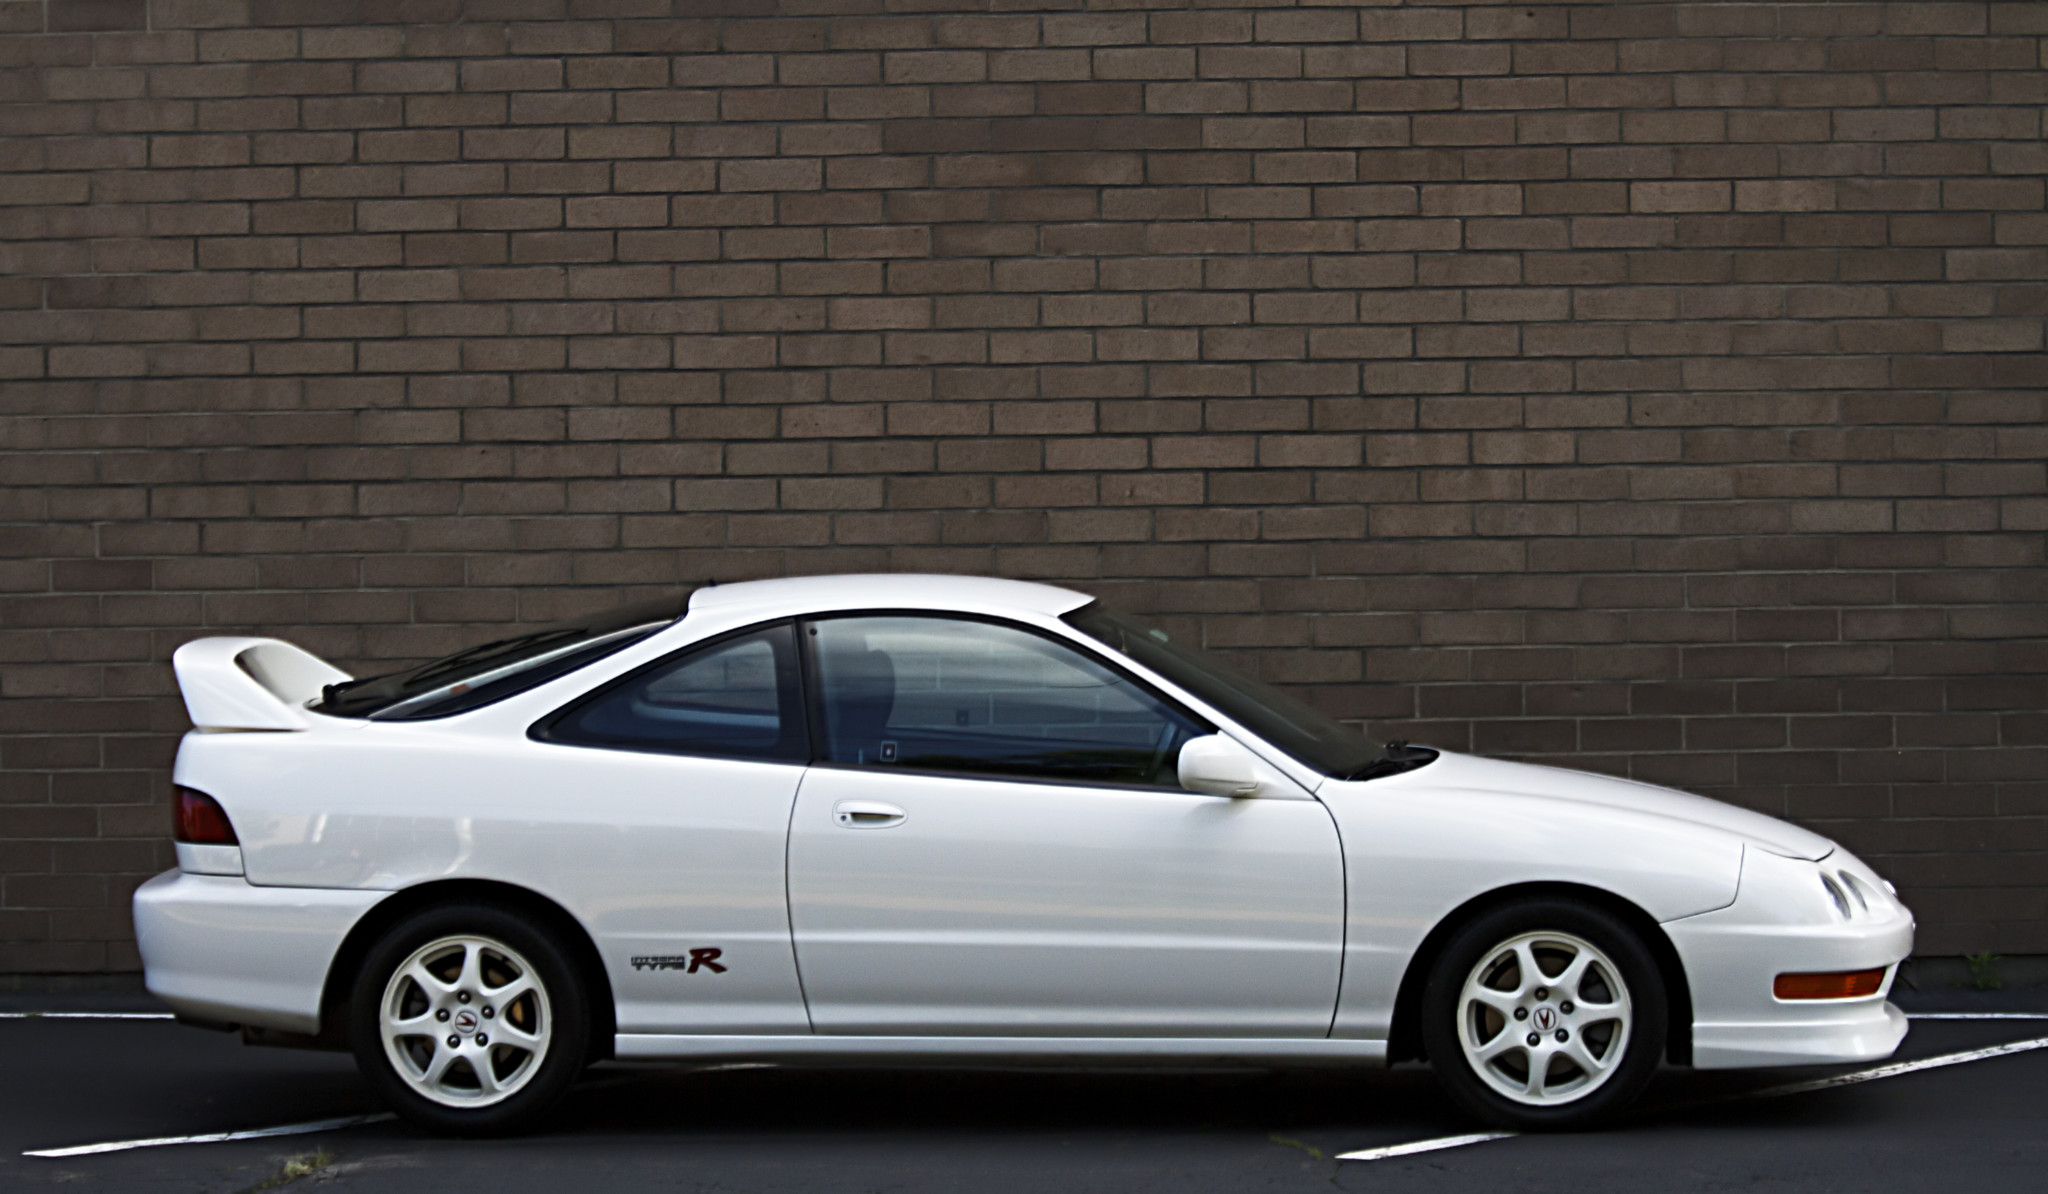 One-owner, 27k Mile Integra Type R Hits the Auction Block